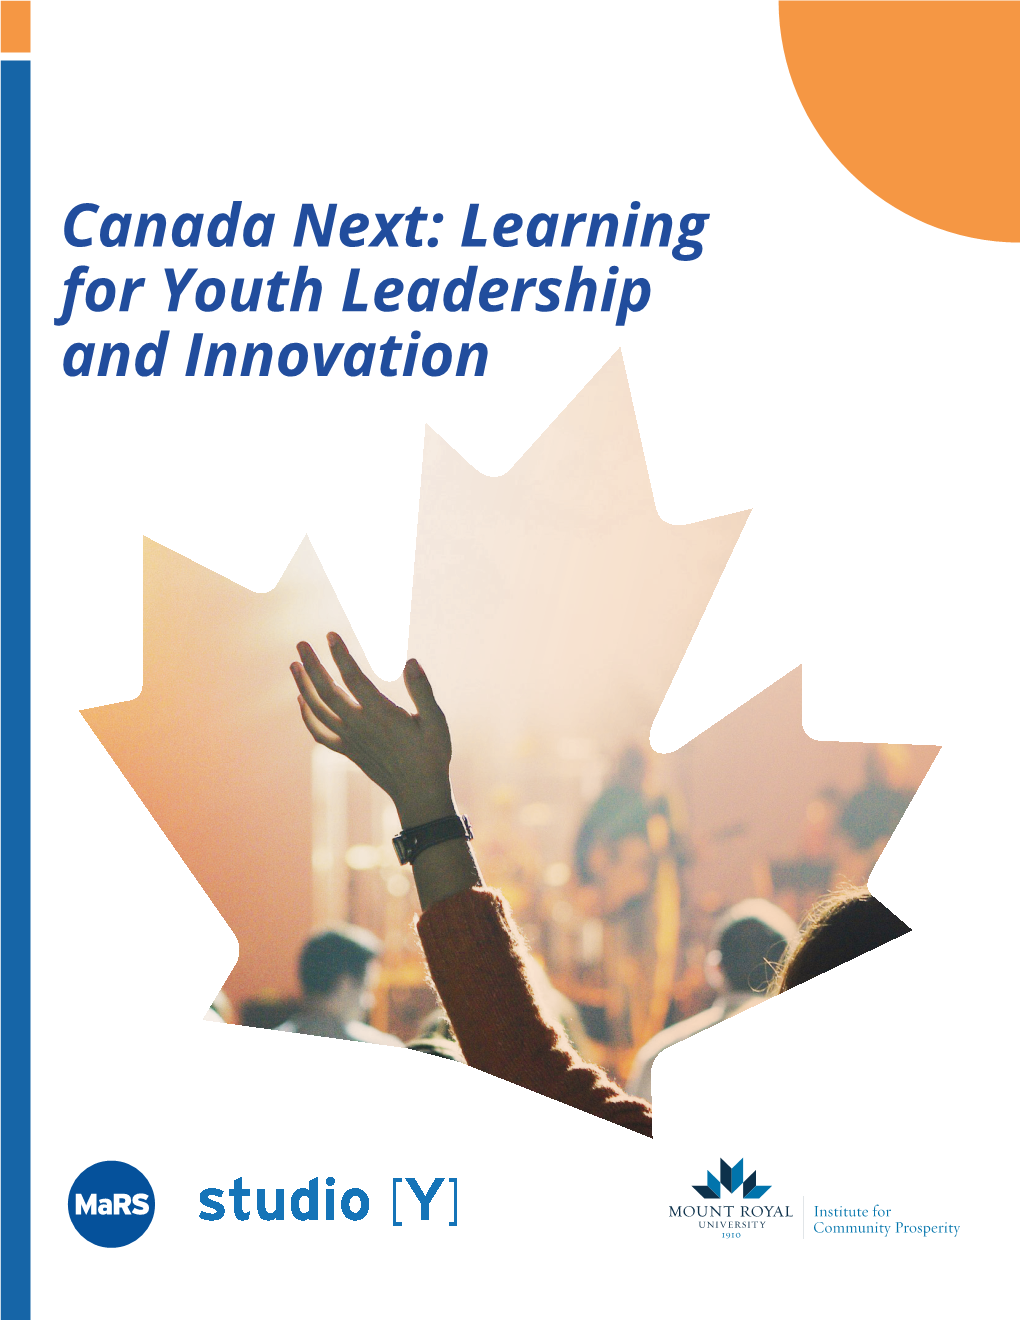 Canada Next: Learning for Youth Leadership and Innovation